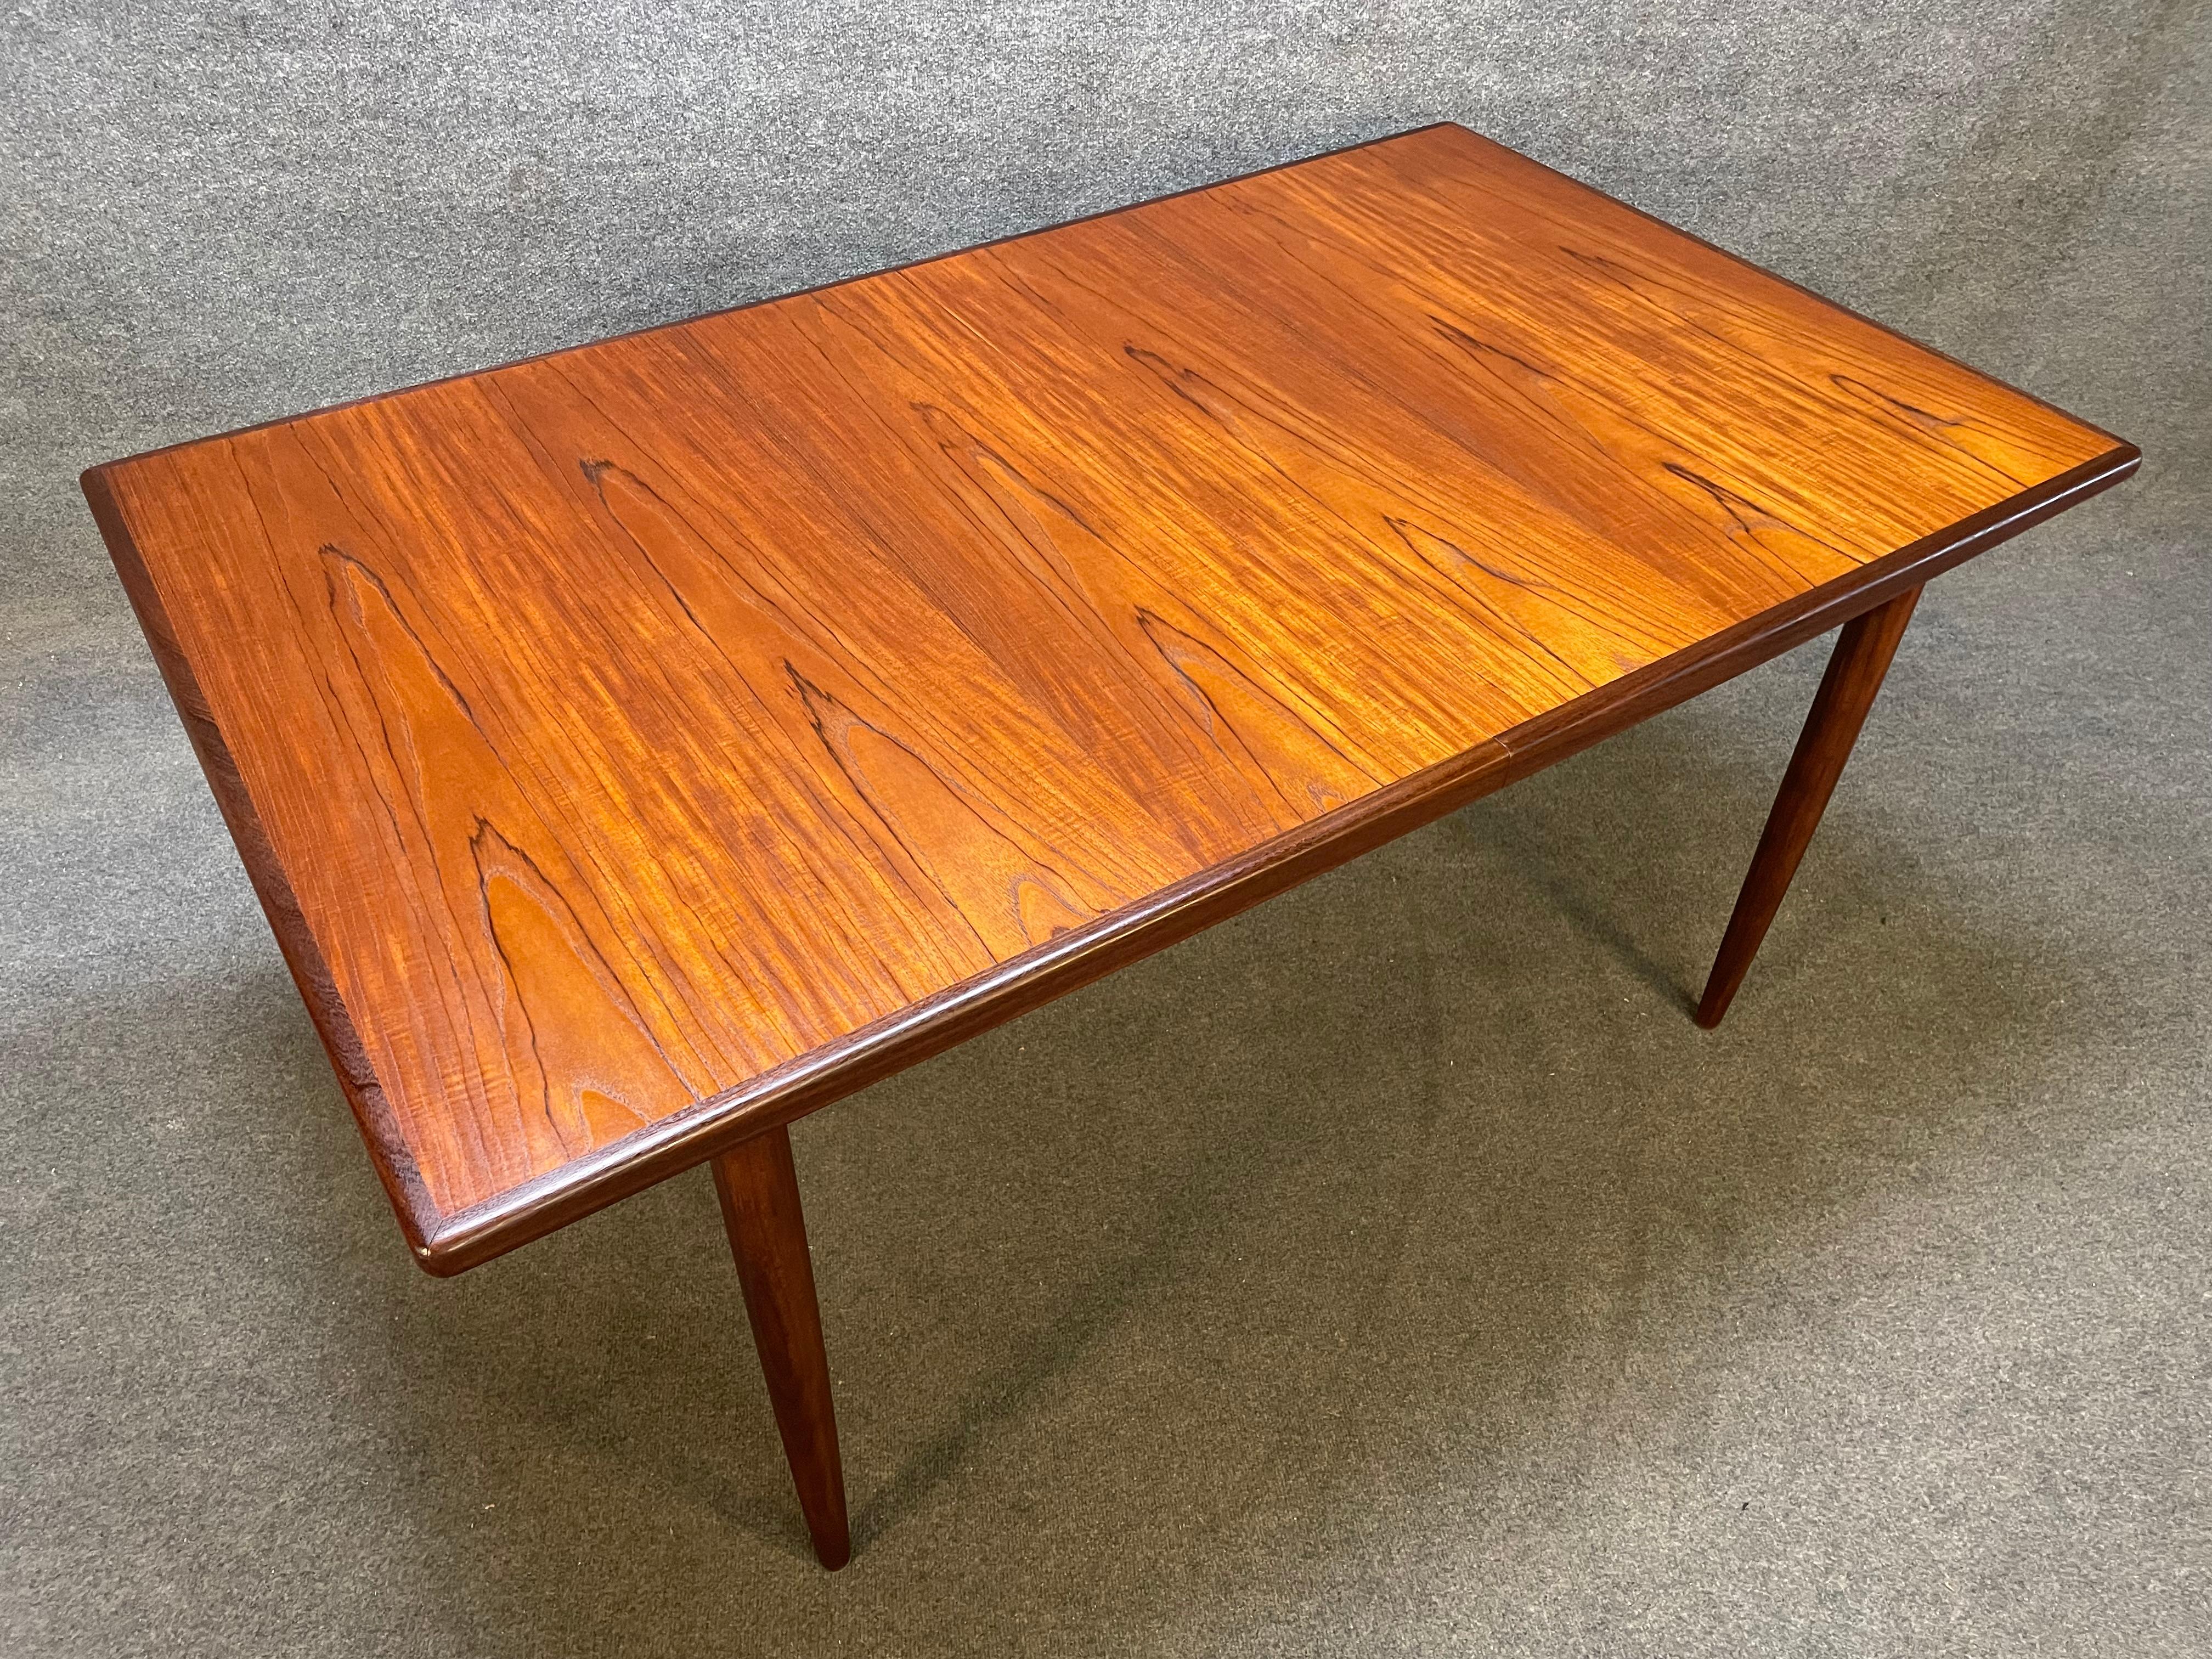 Here is a beautiful mid century modern dining table in teak wood from the acclaimed 